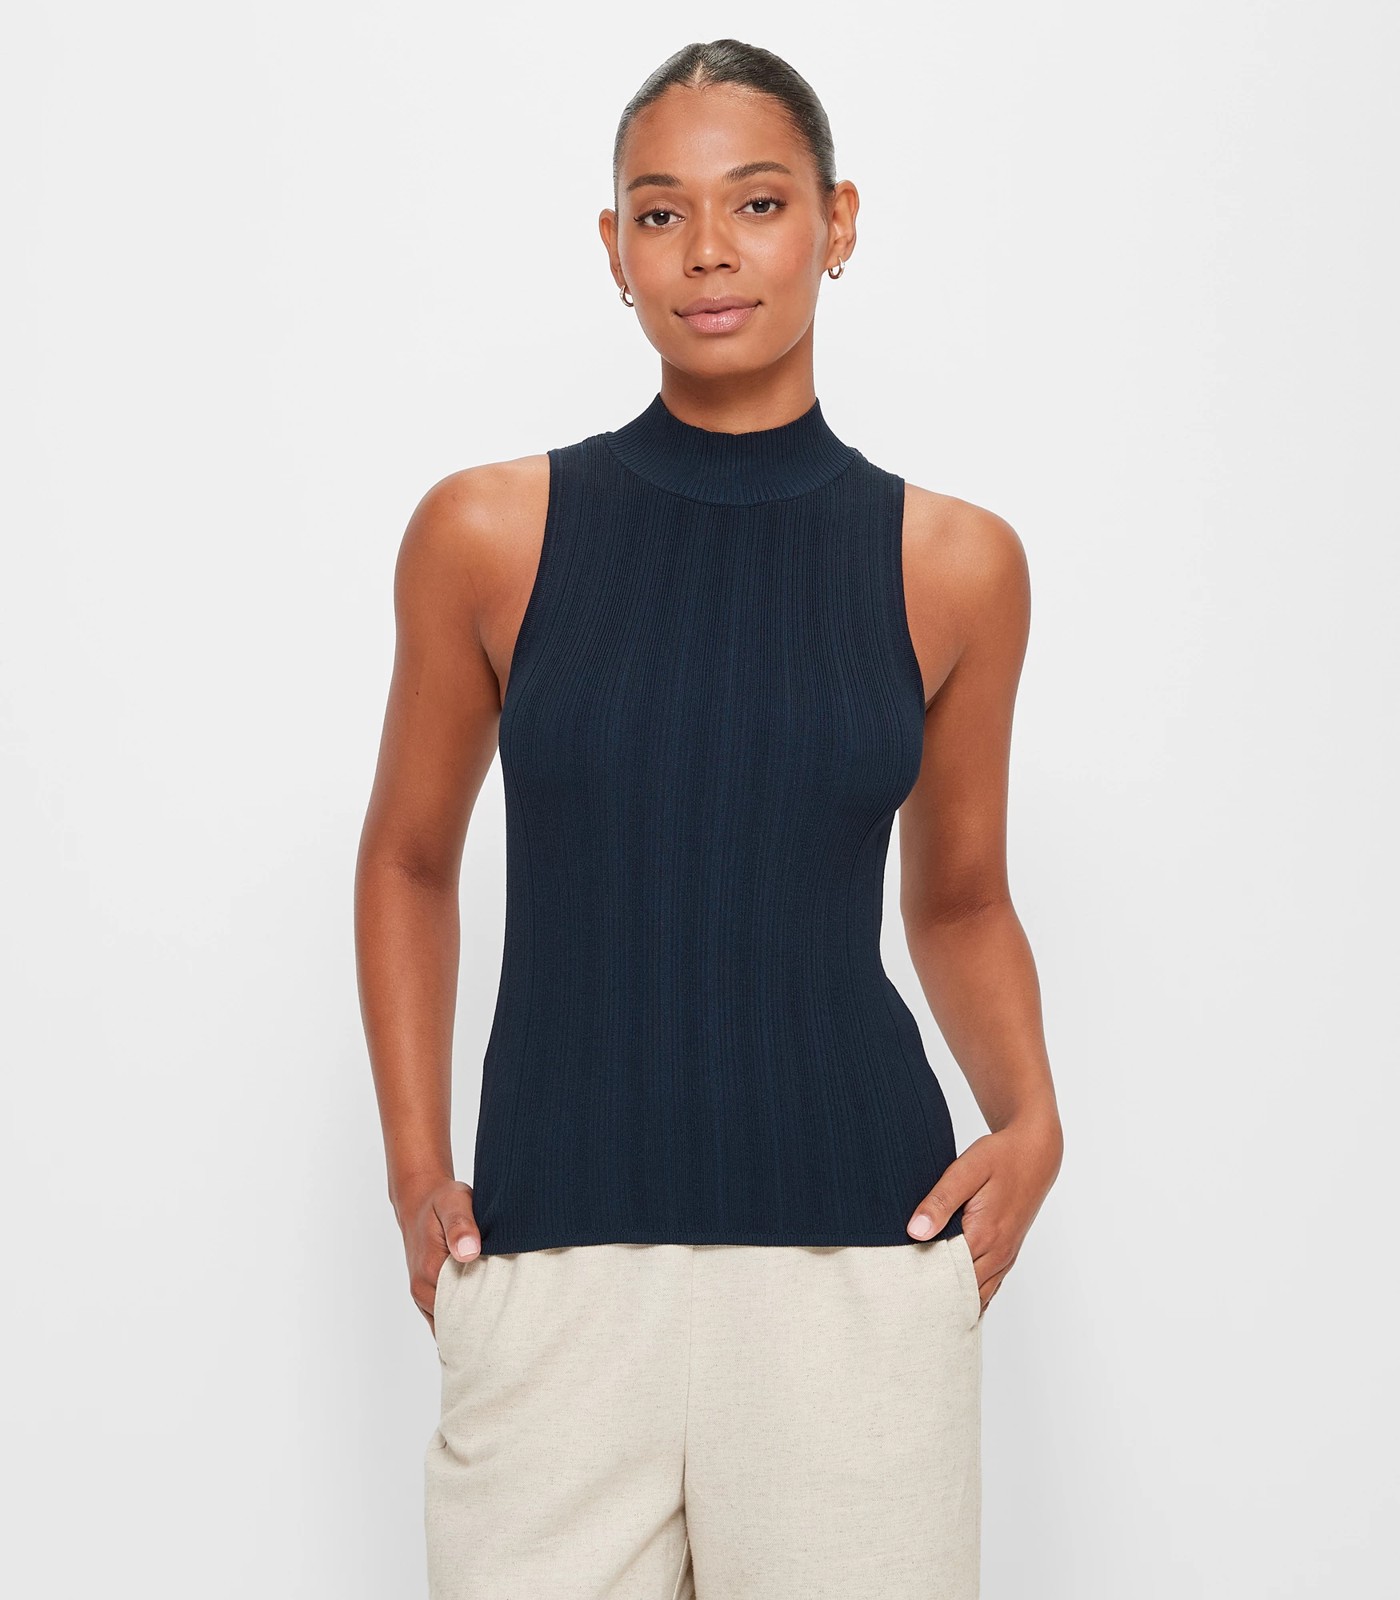 Sleeveless Mock Neck Variegated Knit Top - Preview - Navy Blue